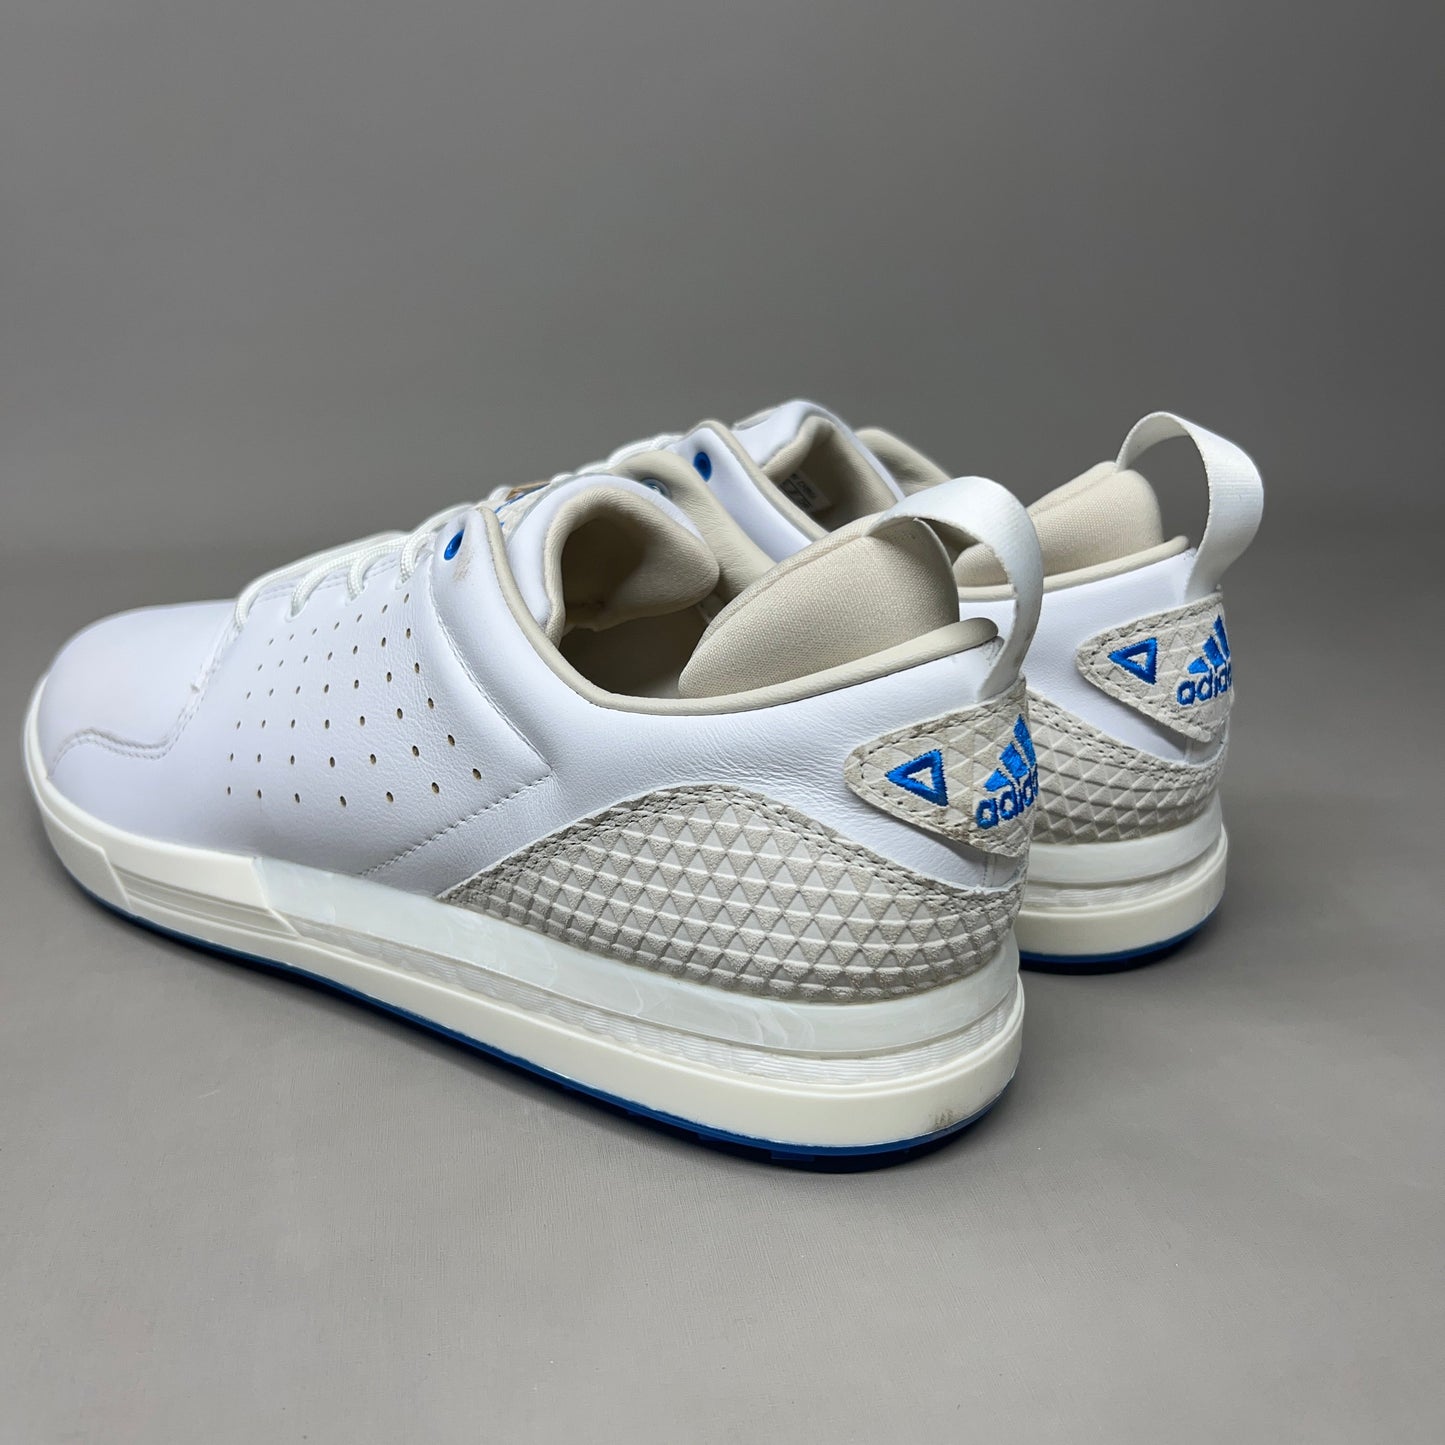 ADIDAS Flopshot Golf Shoes Waterproof Leather Men's Sz 10 White / Gold / Blue GV9668 (New)